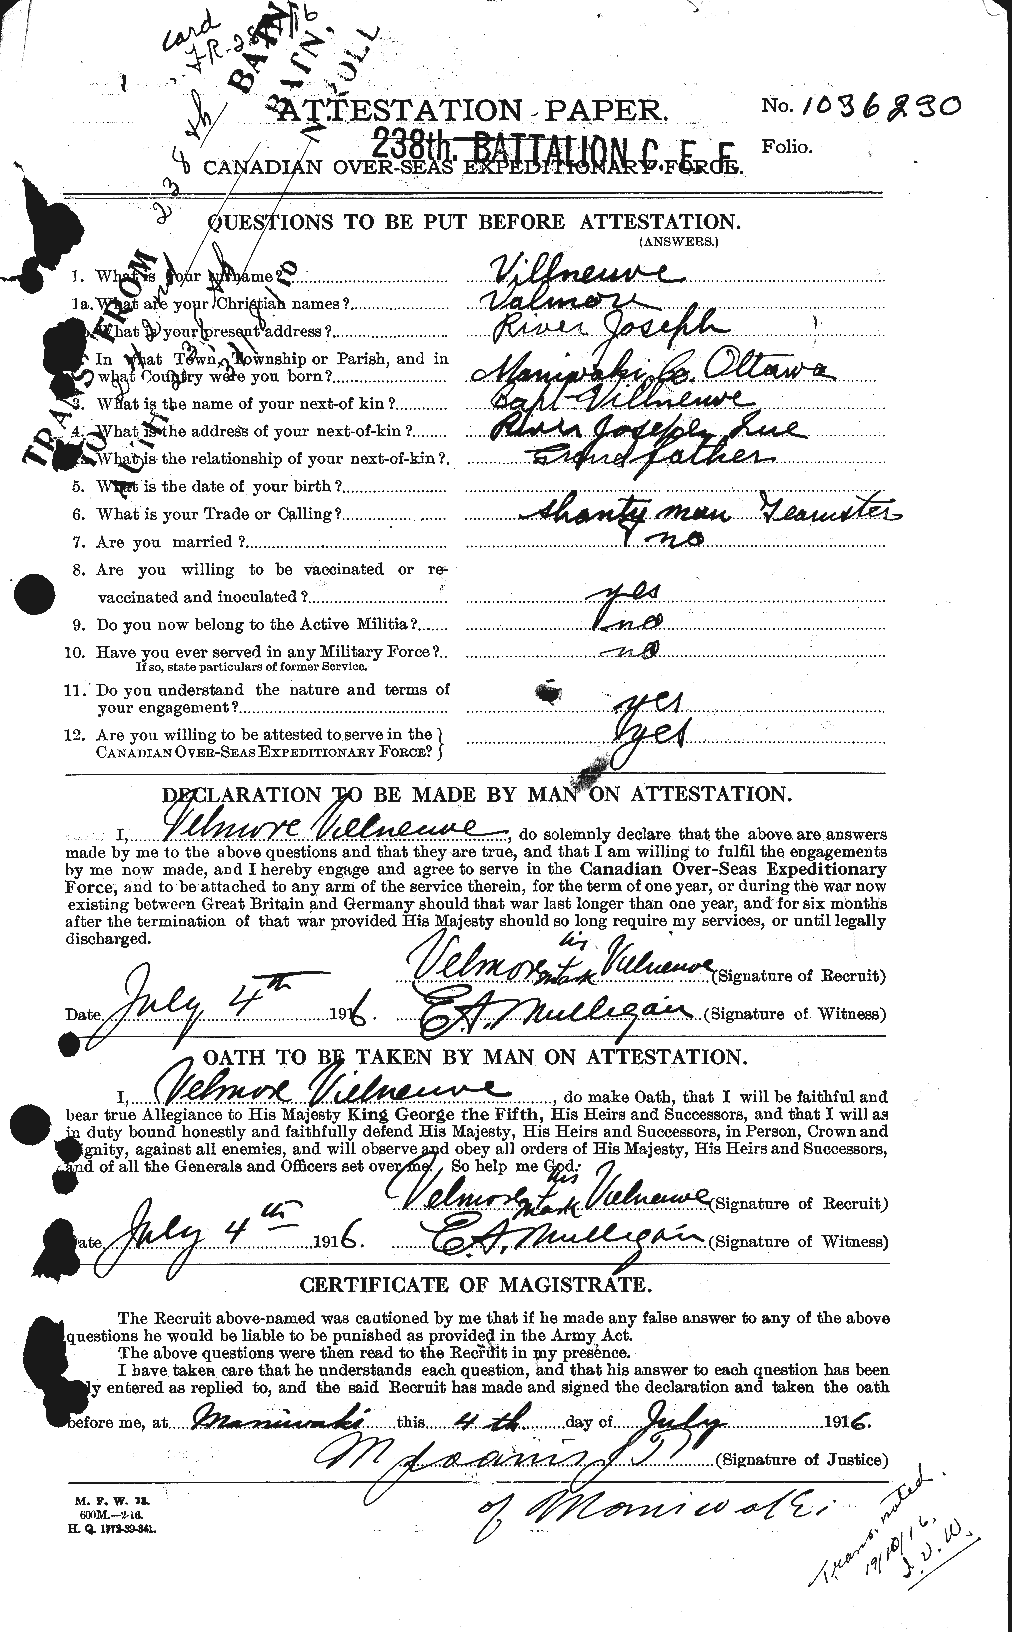 Personnel Records of the First World War - CEF 653907a